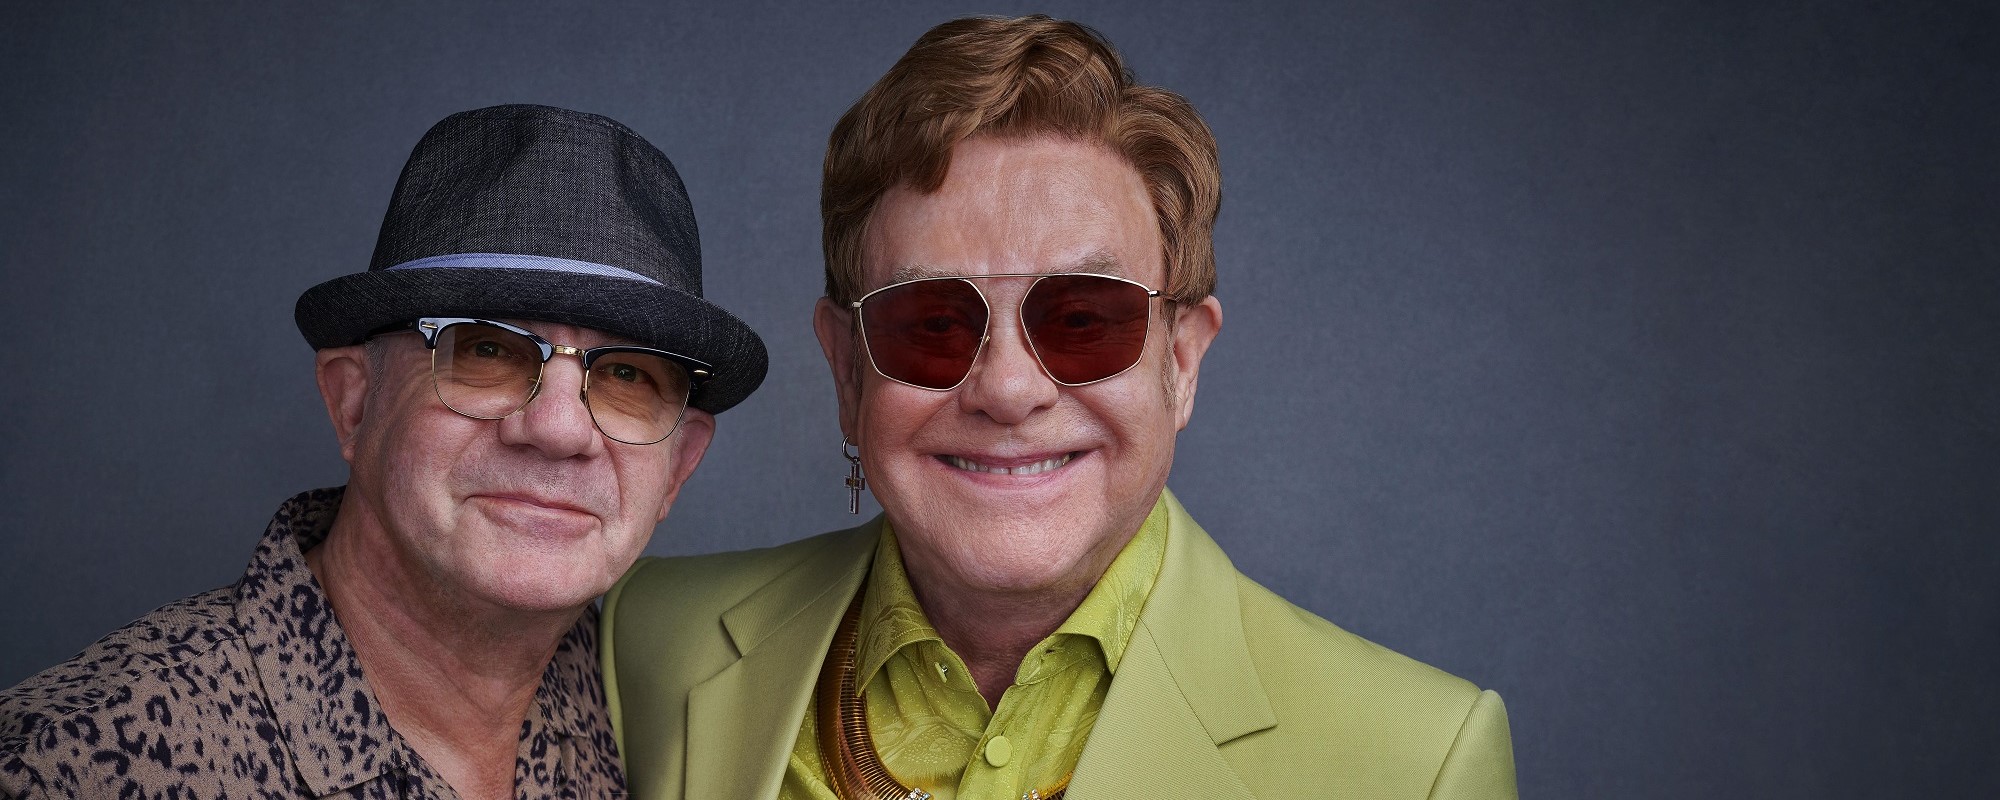 Elton John & Bernie Taupin to Be Honored with Prestigious Gershwin Prize at All-Star Tribute Concert